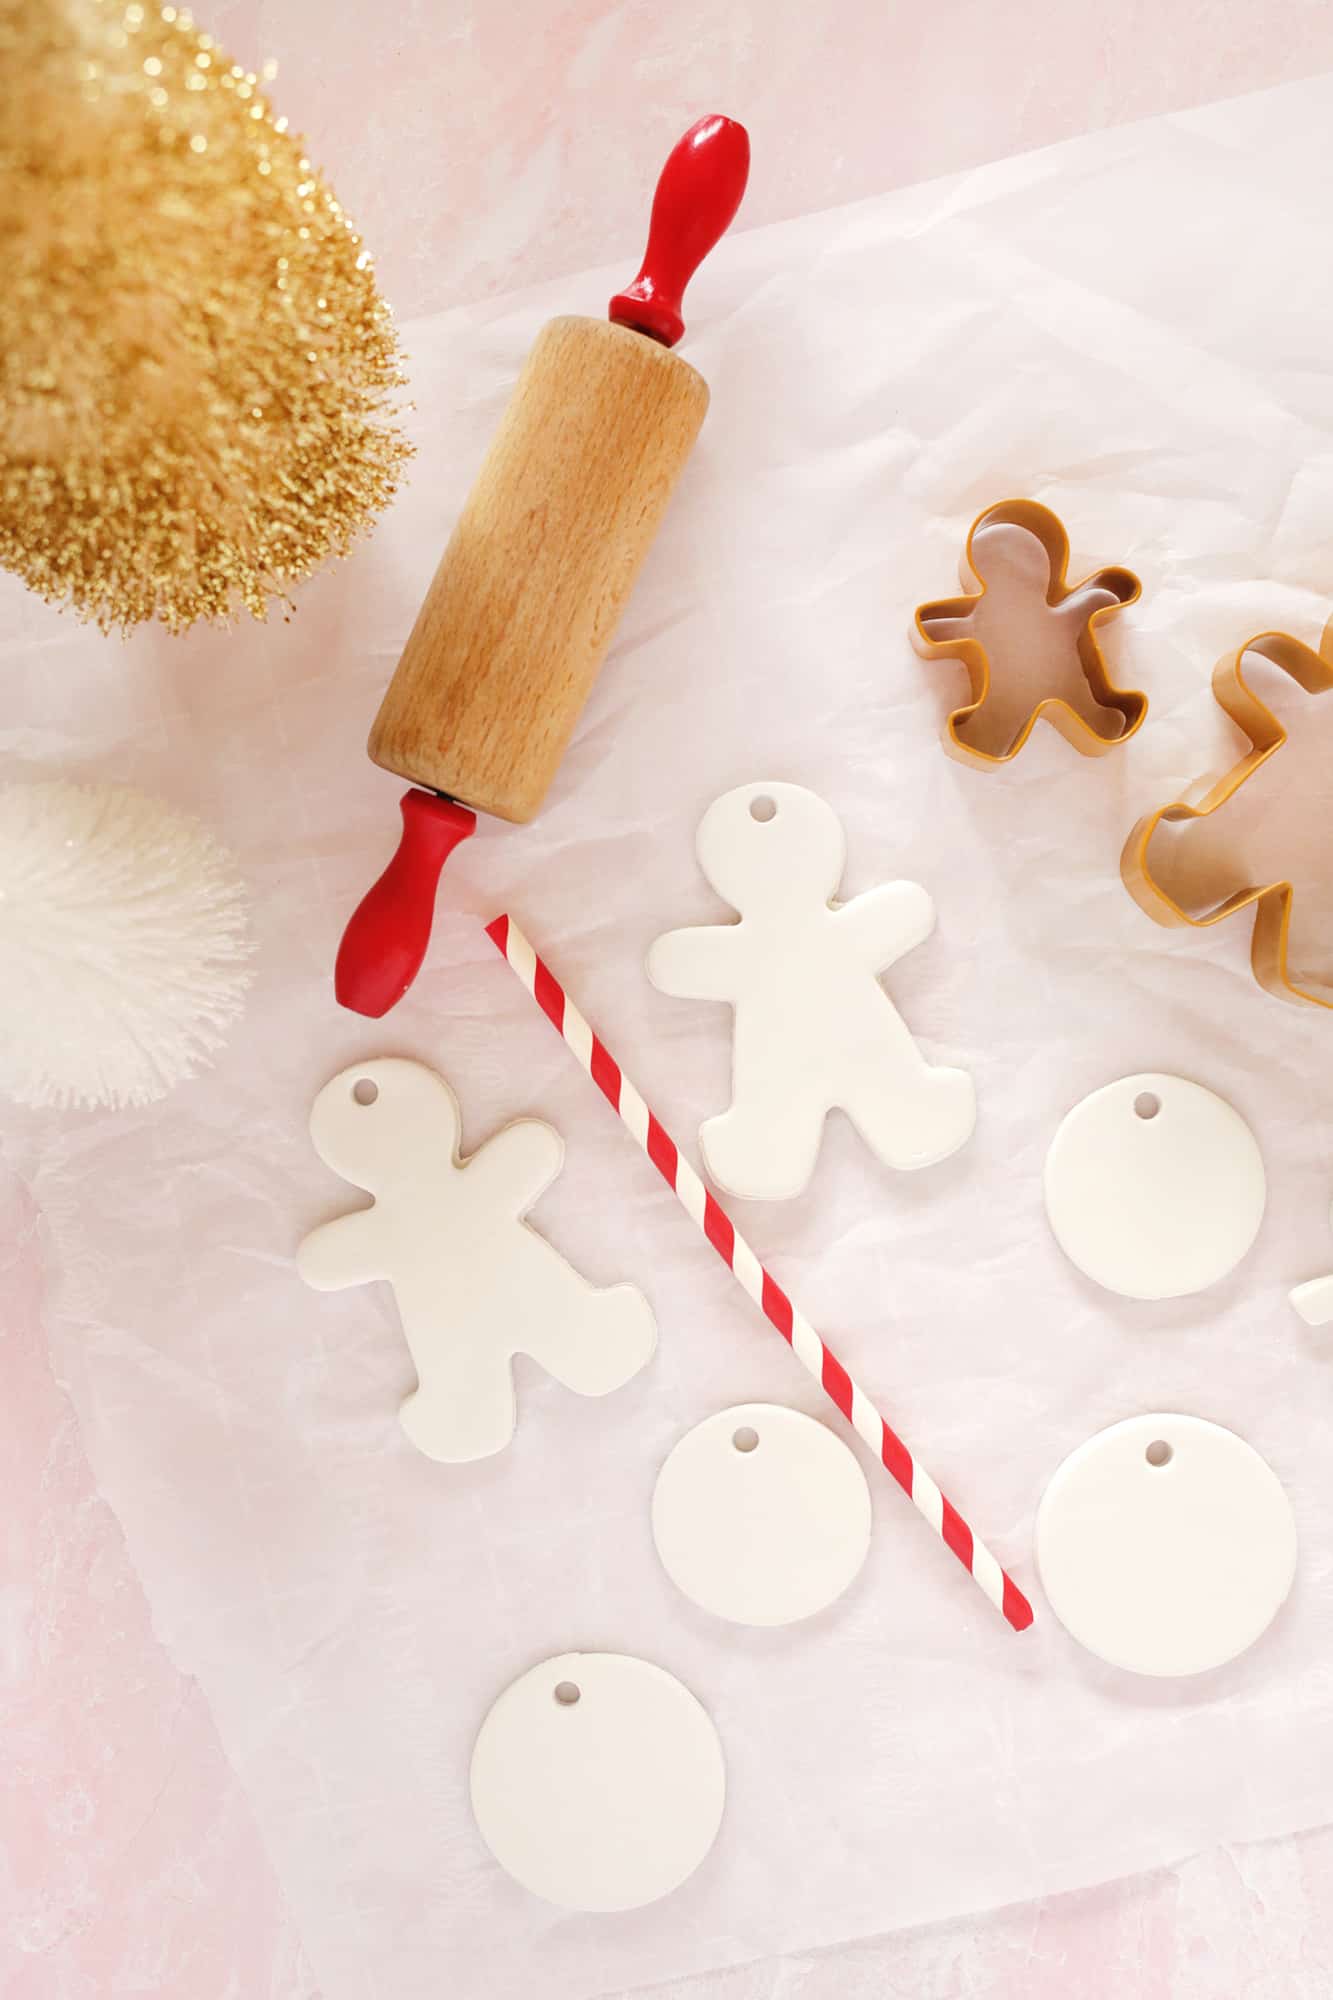 Gingerbread people and clay circular ornaments 